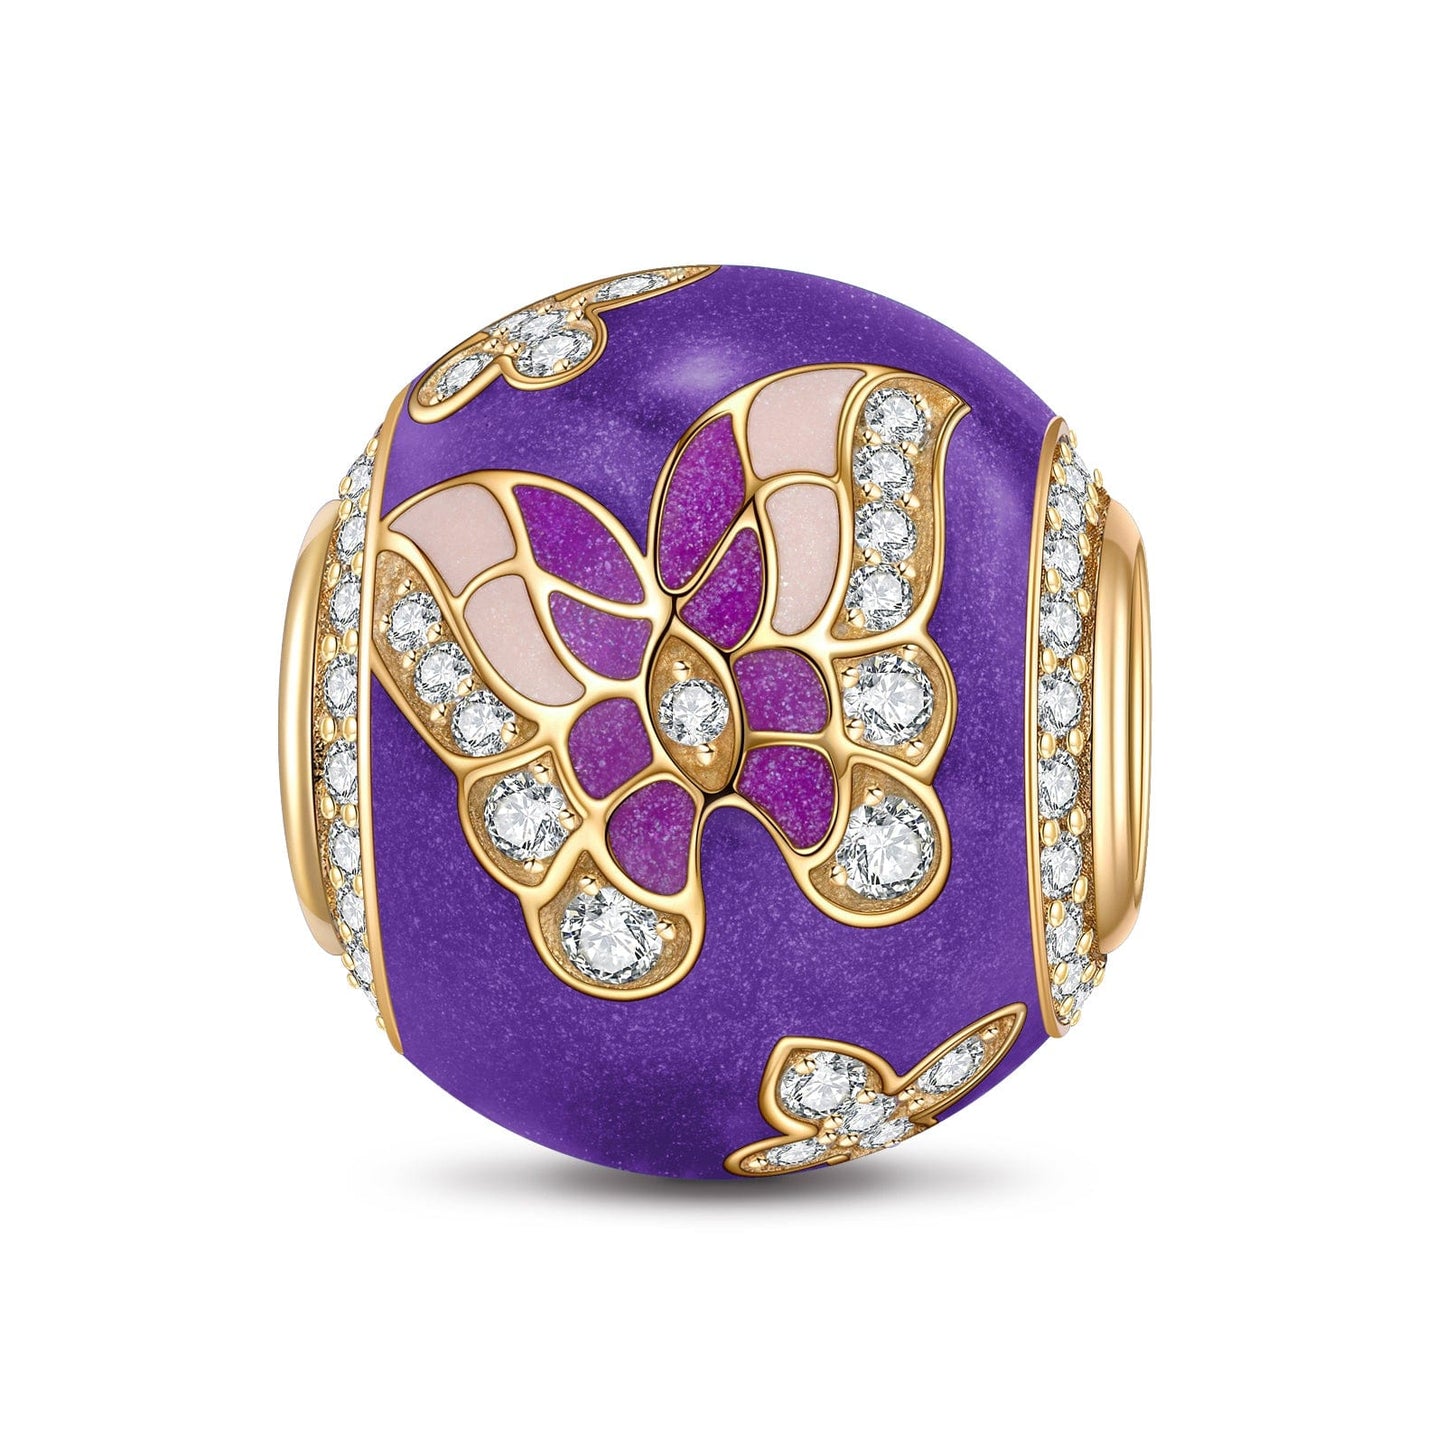 Wisteria Butterfly Dance Tarnish-resistant Silver Charms With Enamel In 14K Gold Plated